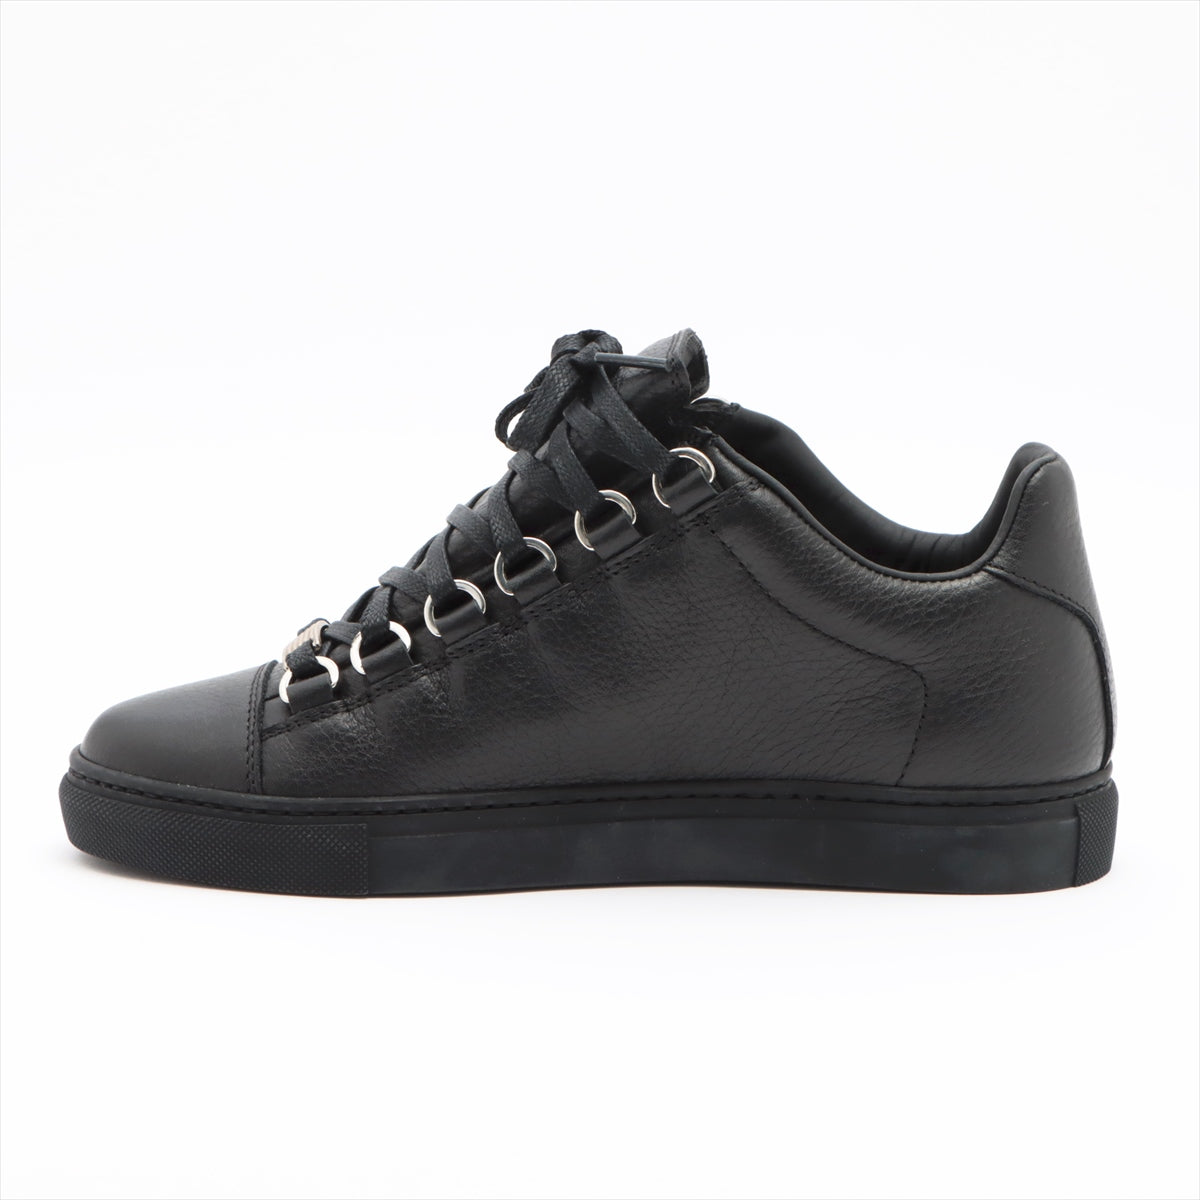 Balenciaga Leather Sneakers 35 Ladies' Black 433295 Box Included